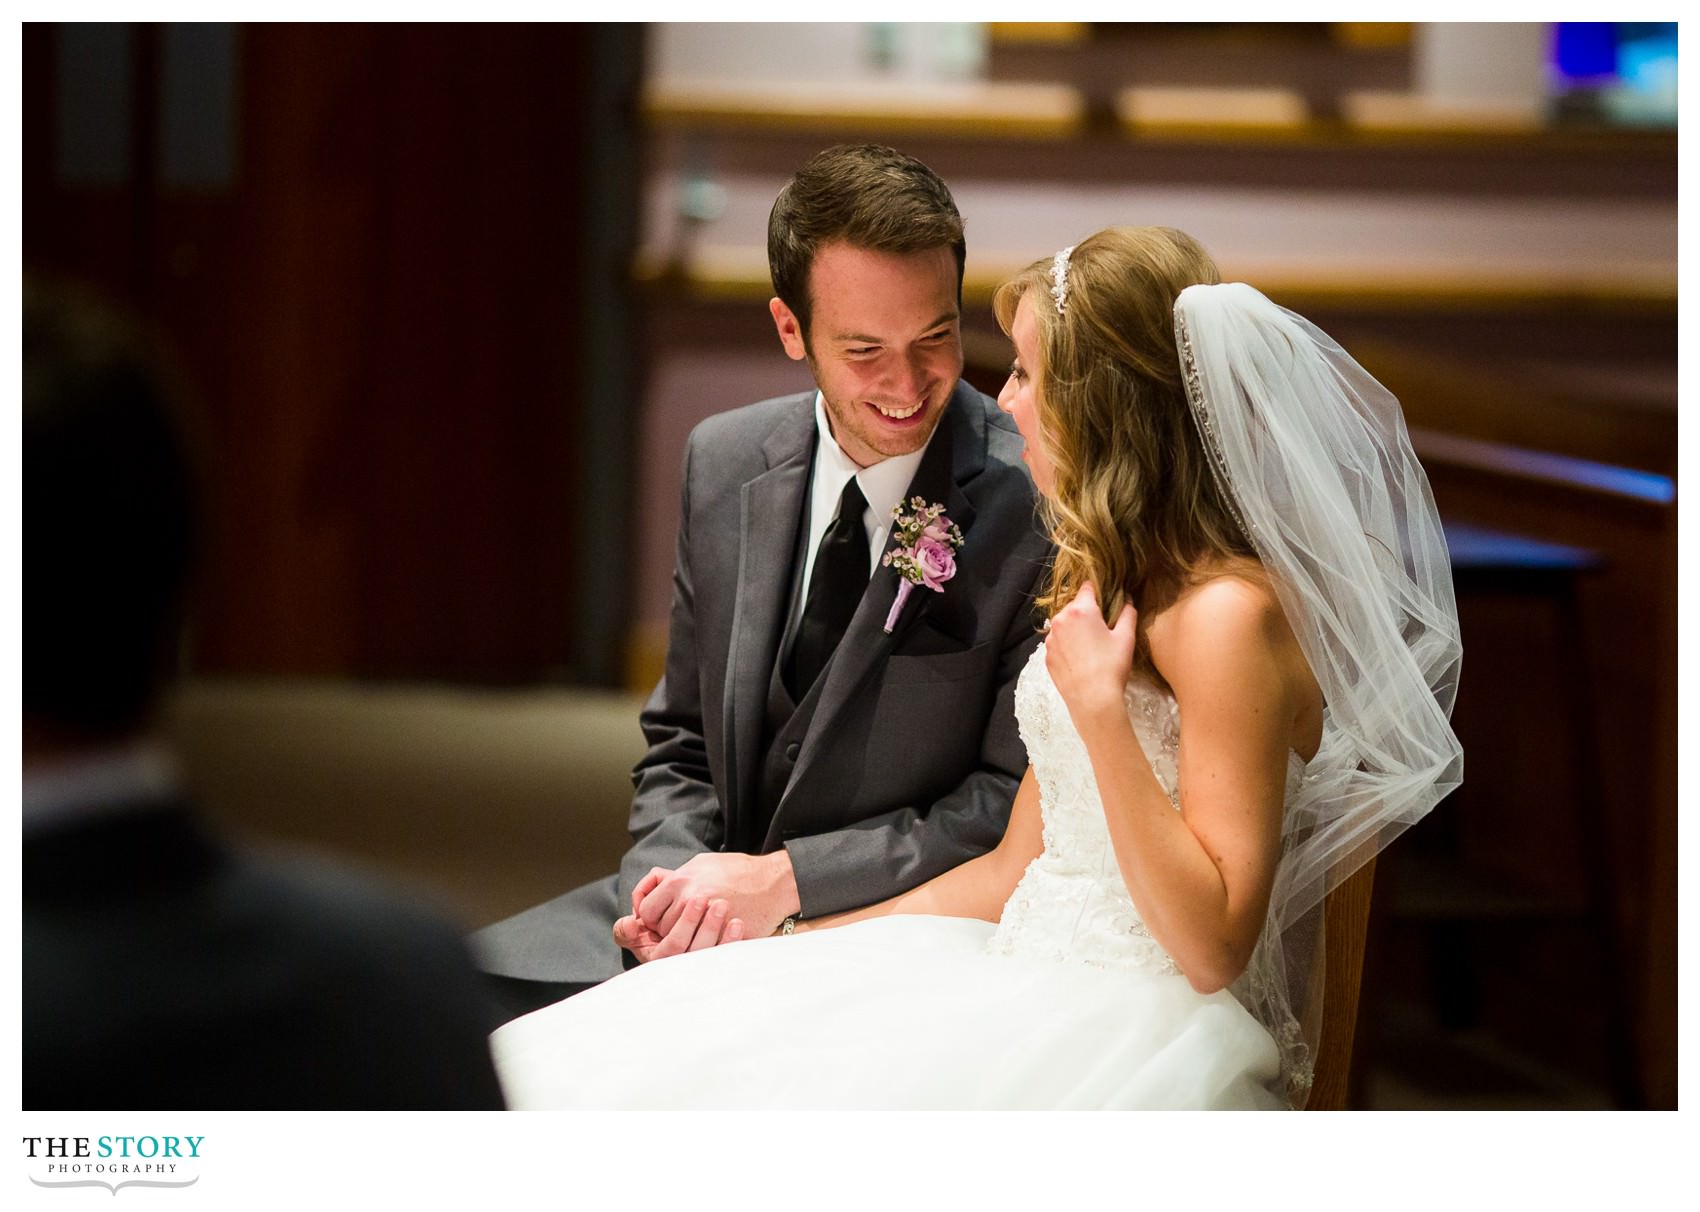 candid moment at St. Ann's Church wedding ceremony in Manlius